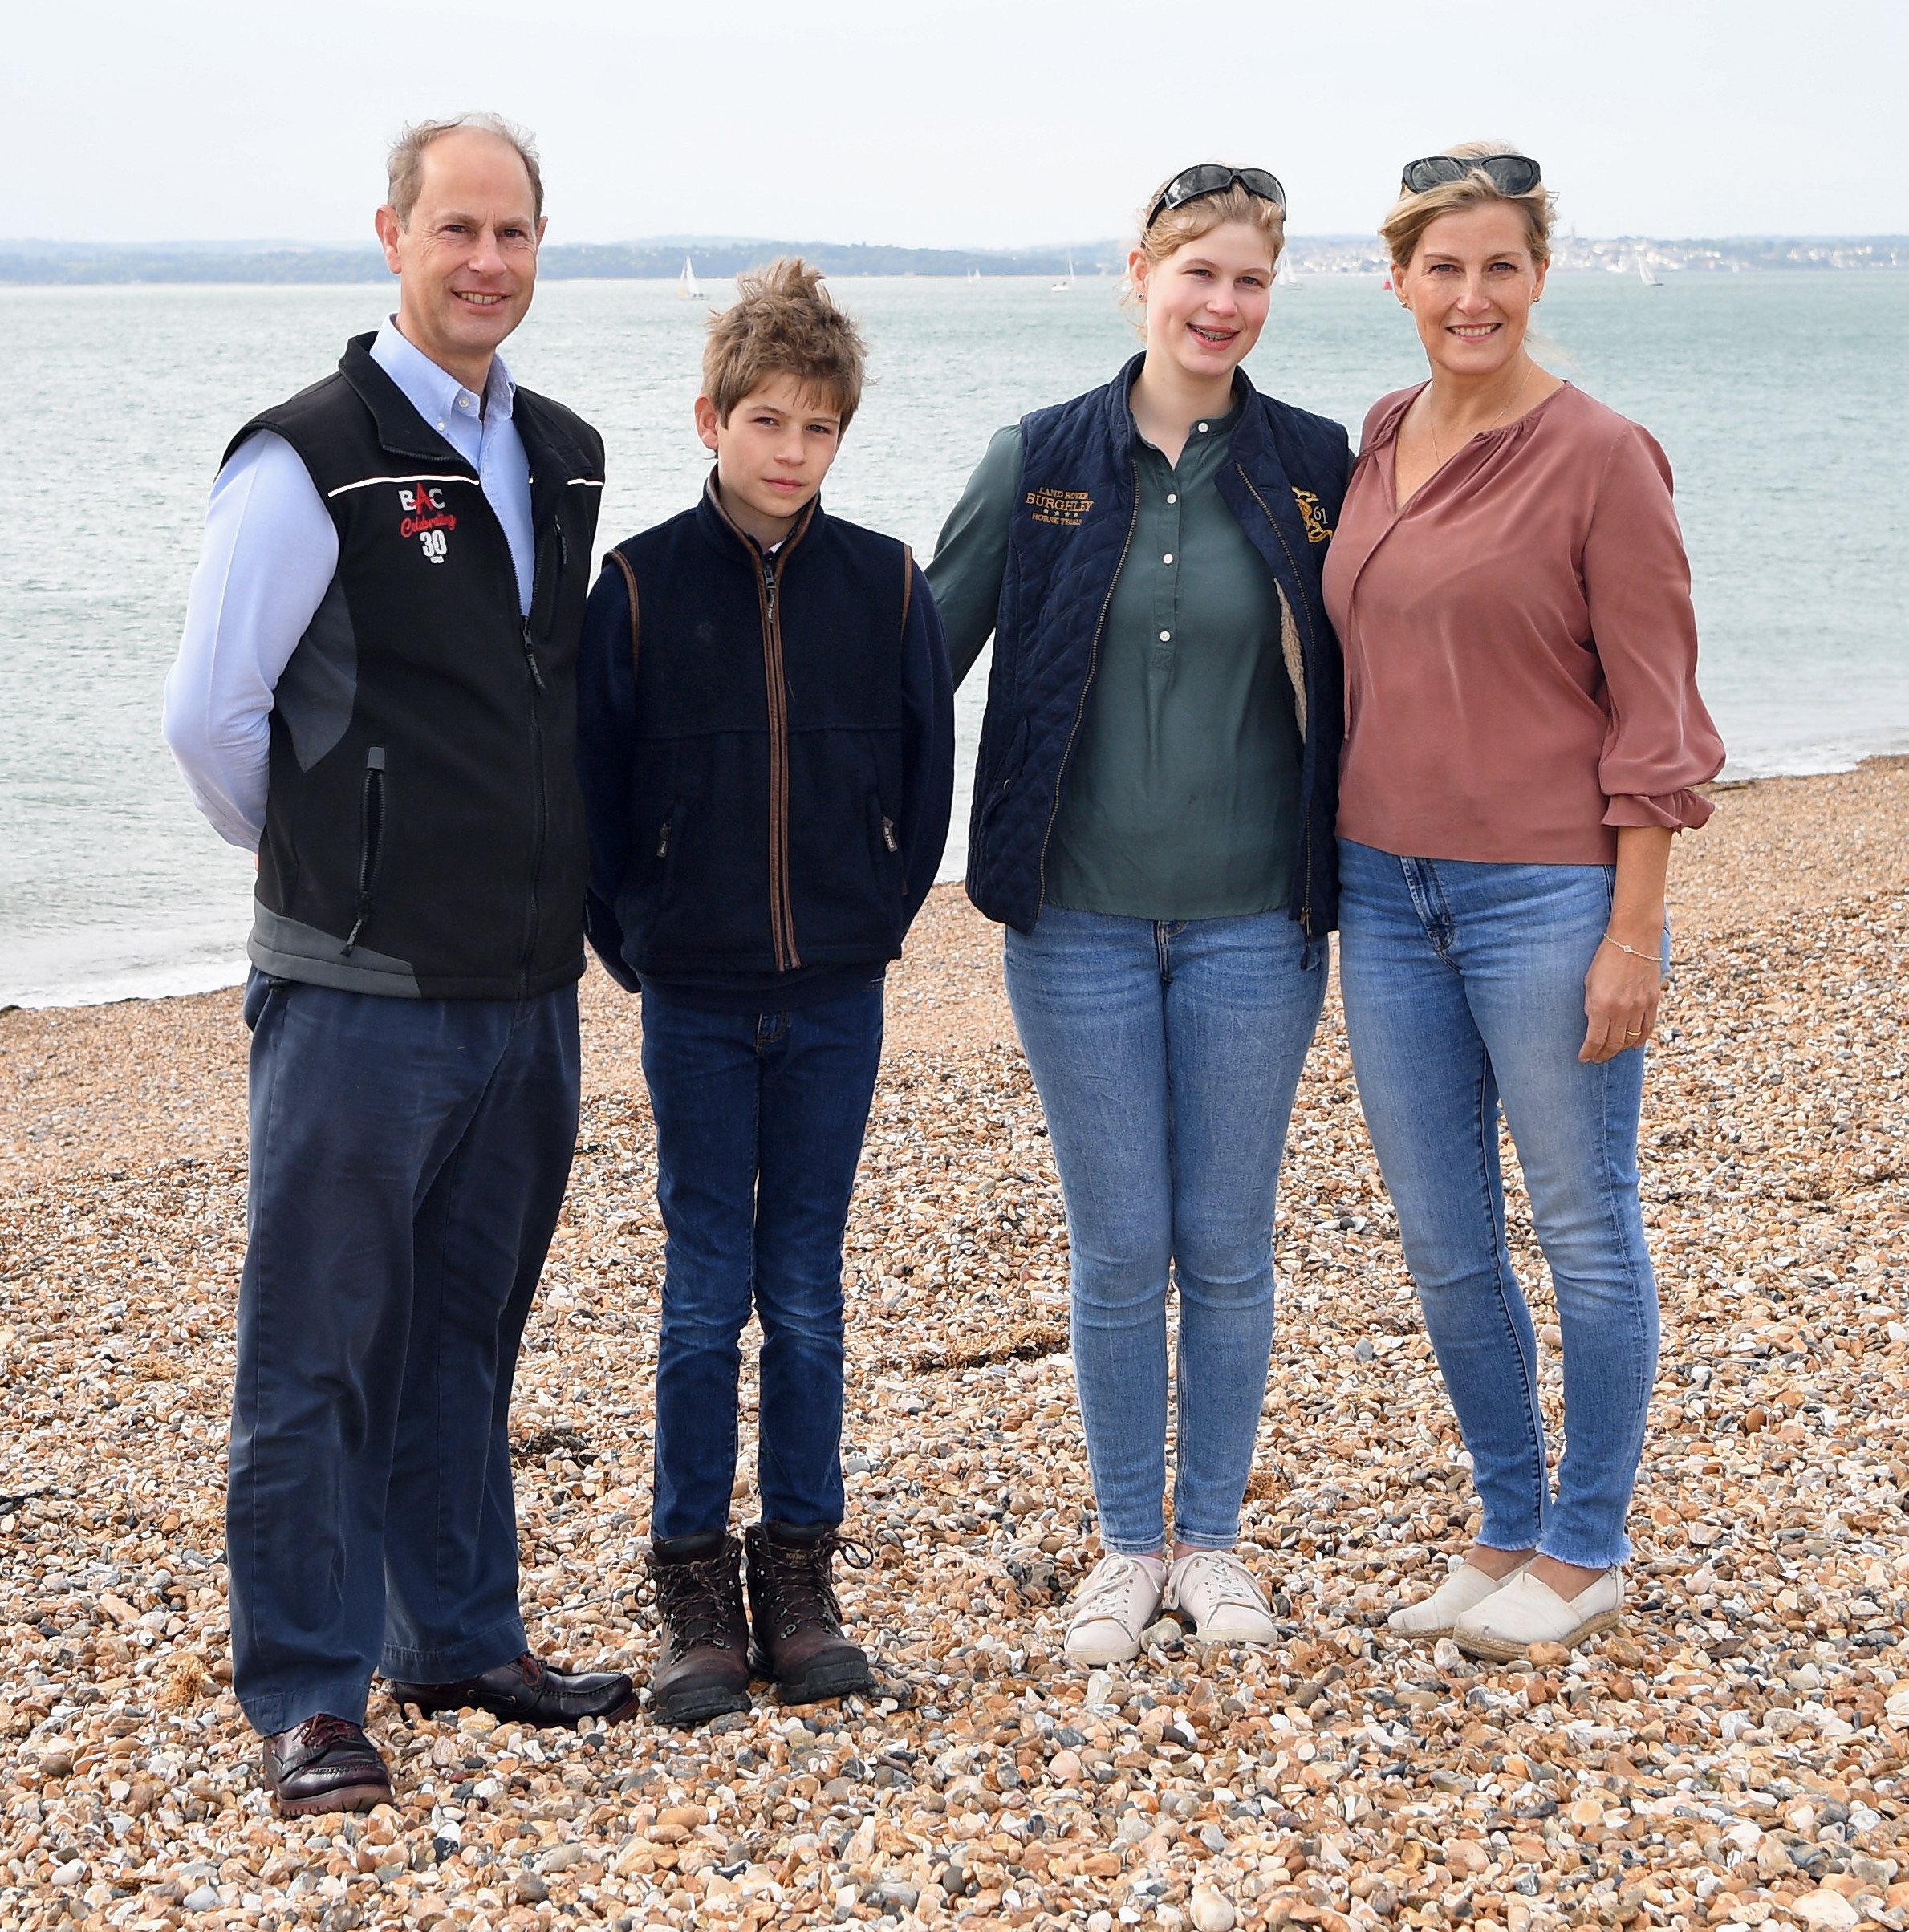 Prince Edward, Earl of Wessex, son, James, Viscount Severn, daughter, Lady Louise Windsor, and Sophie, Countess of Wessex, pose for photographs by the beach on September 20, 2020, in Portsmouth, England. | Source: Getty Images